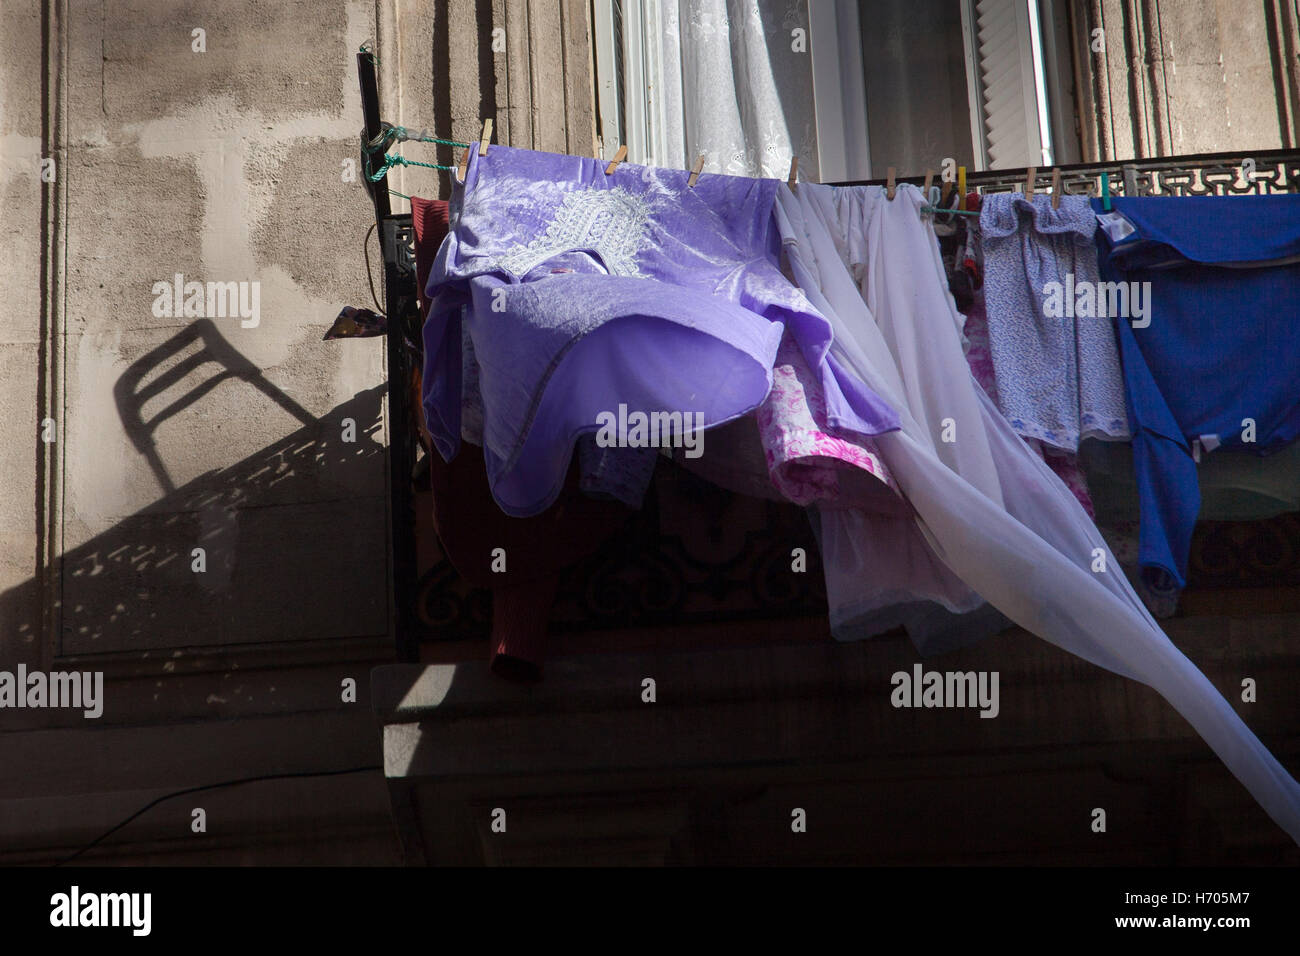 Clothes drying on a balcony in Marseille, France Stock Photo